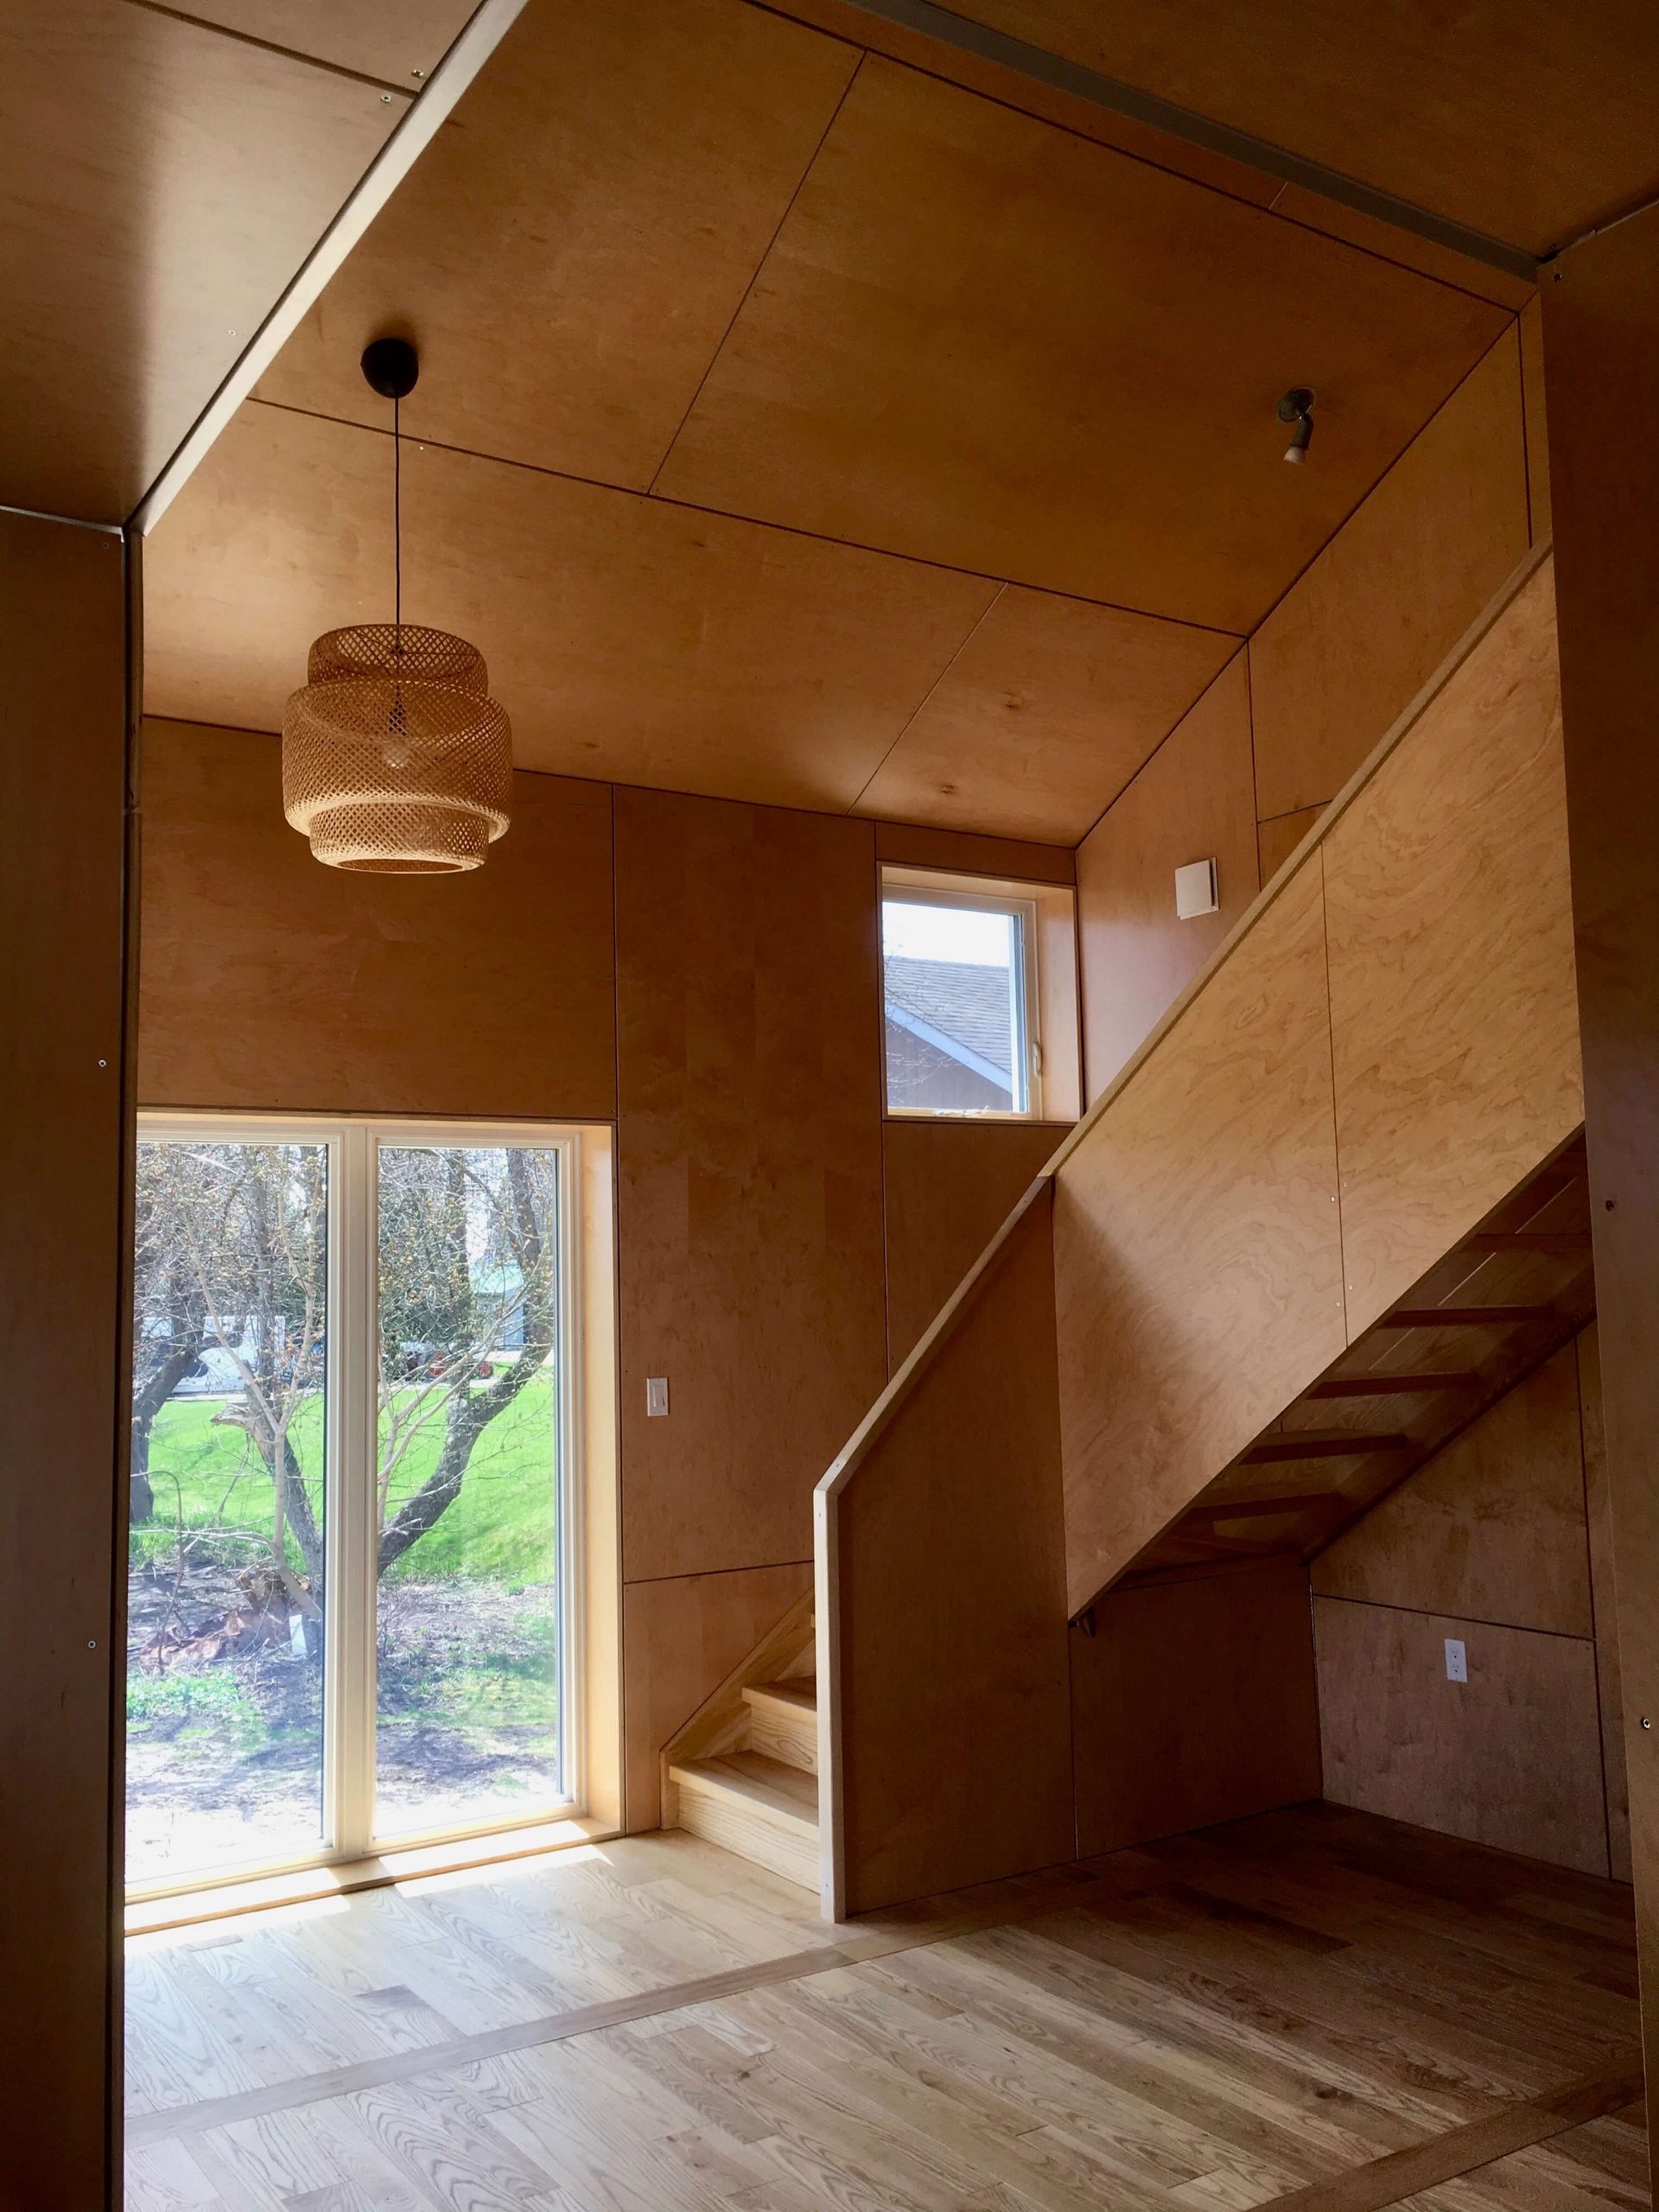 Plywood interior of house